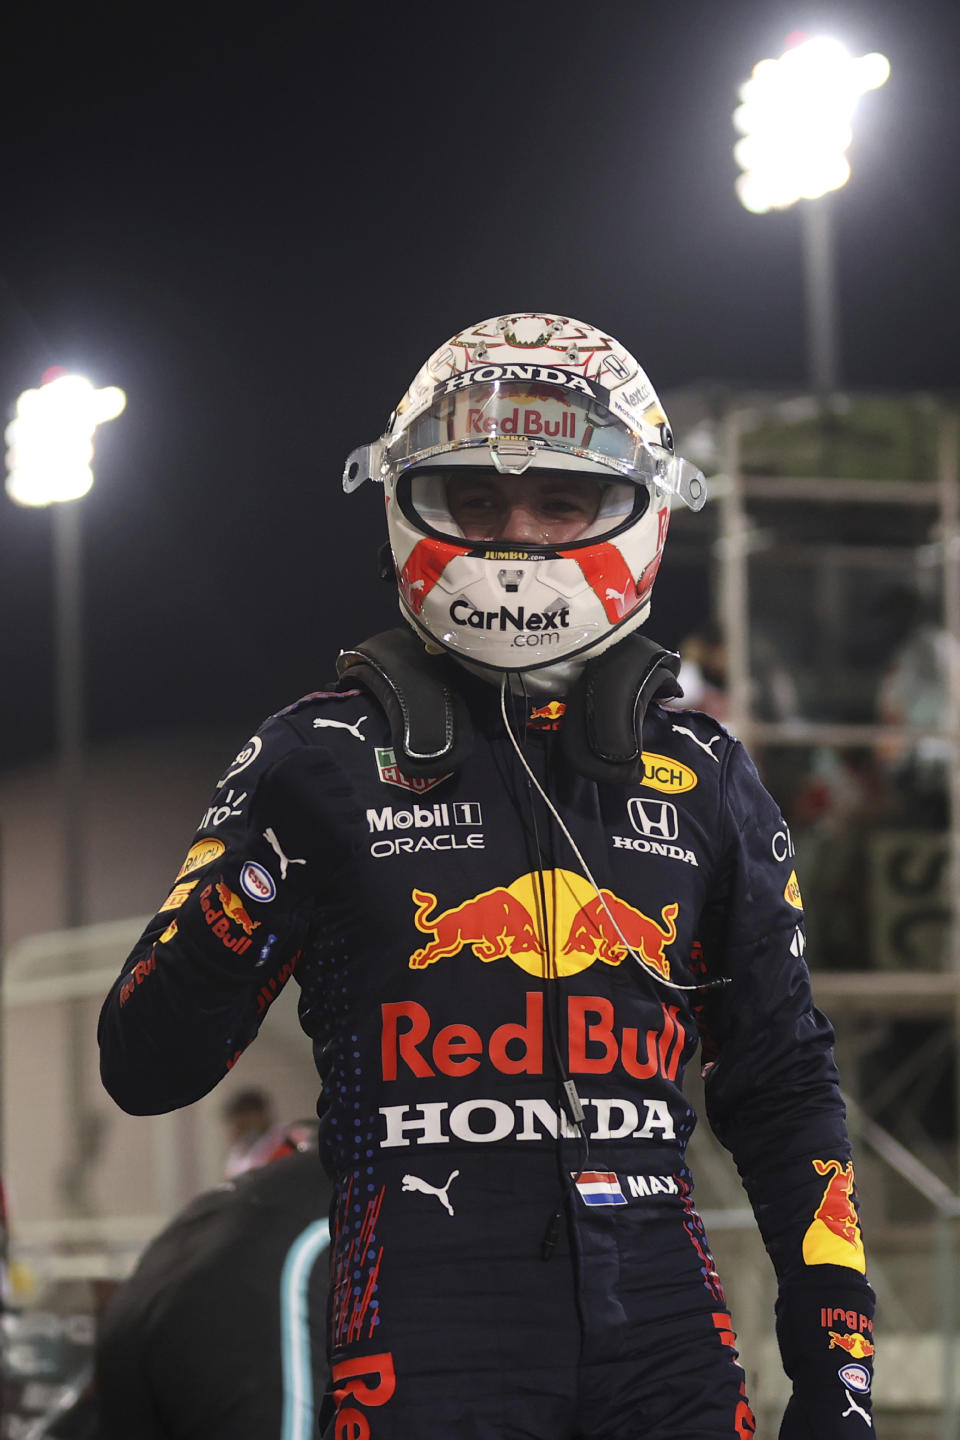 Red Bull driver Max Verstappen of the Netherlands celebrates the qualifying for the Bahrain Formula One Grand Prix, at the Formula One Bahrain International Circuit in Sakhir, Bahrain, Saturday, March 27, 2021. The Bahrain Formula One Grand Prix will take place on Sunday. (Lars Baron, Pool via AP)